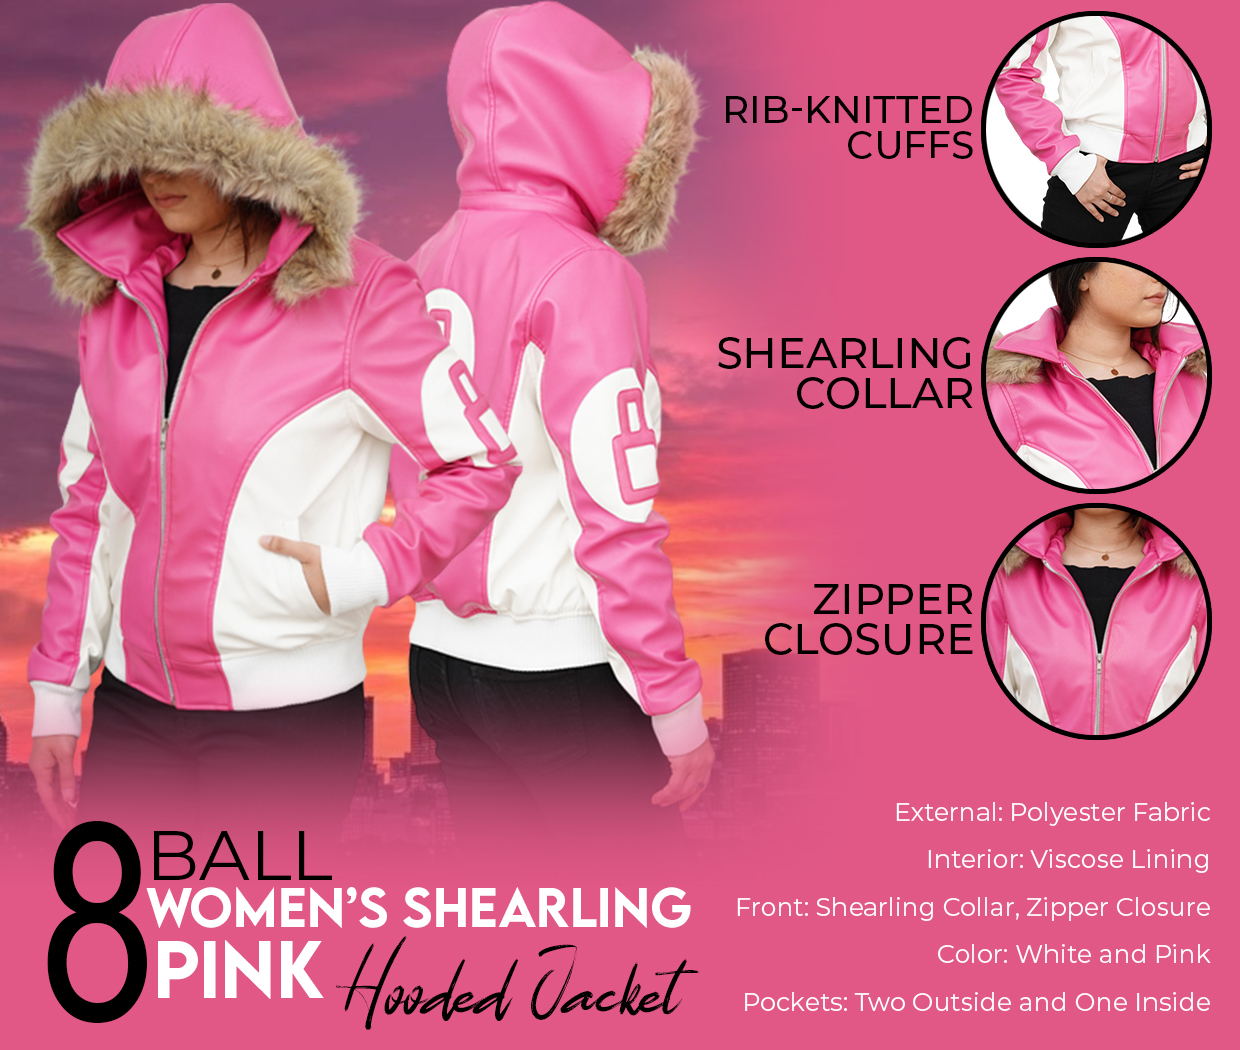 8 Ball Women’s Shearling Pink Hooded Jacket Infographic Post